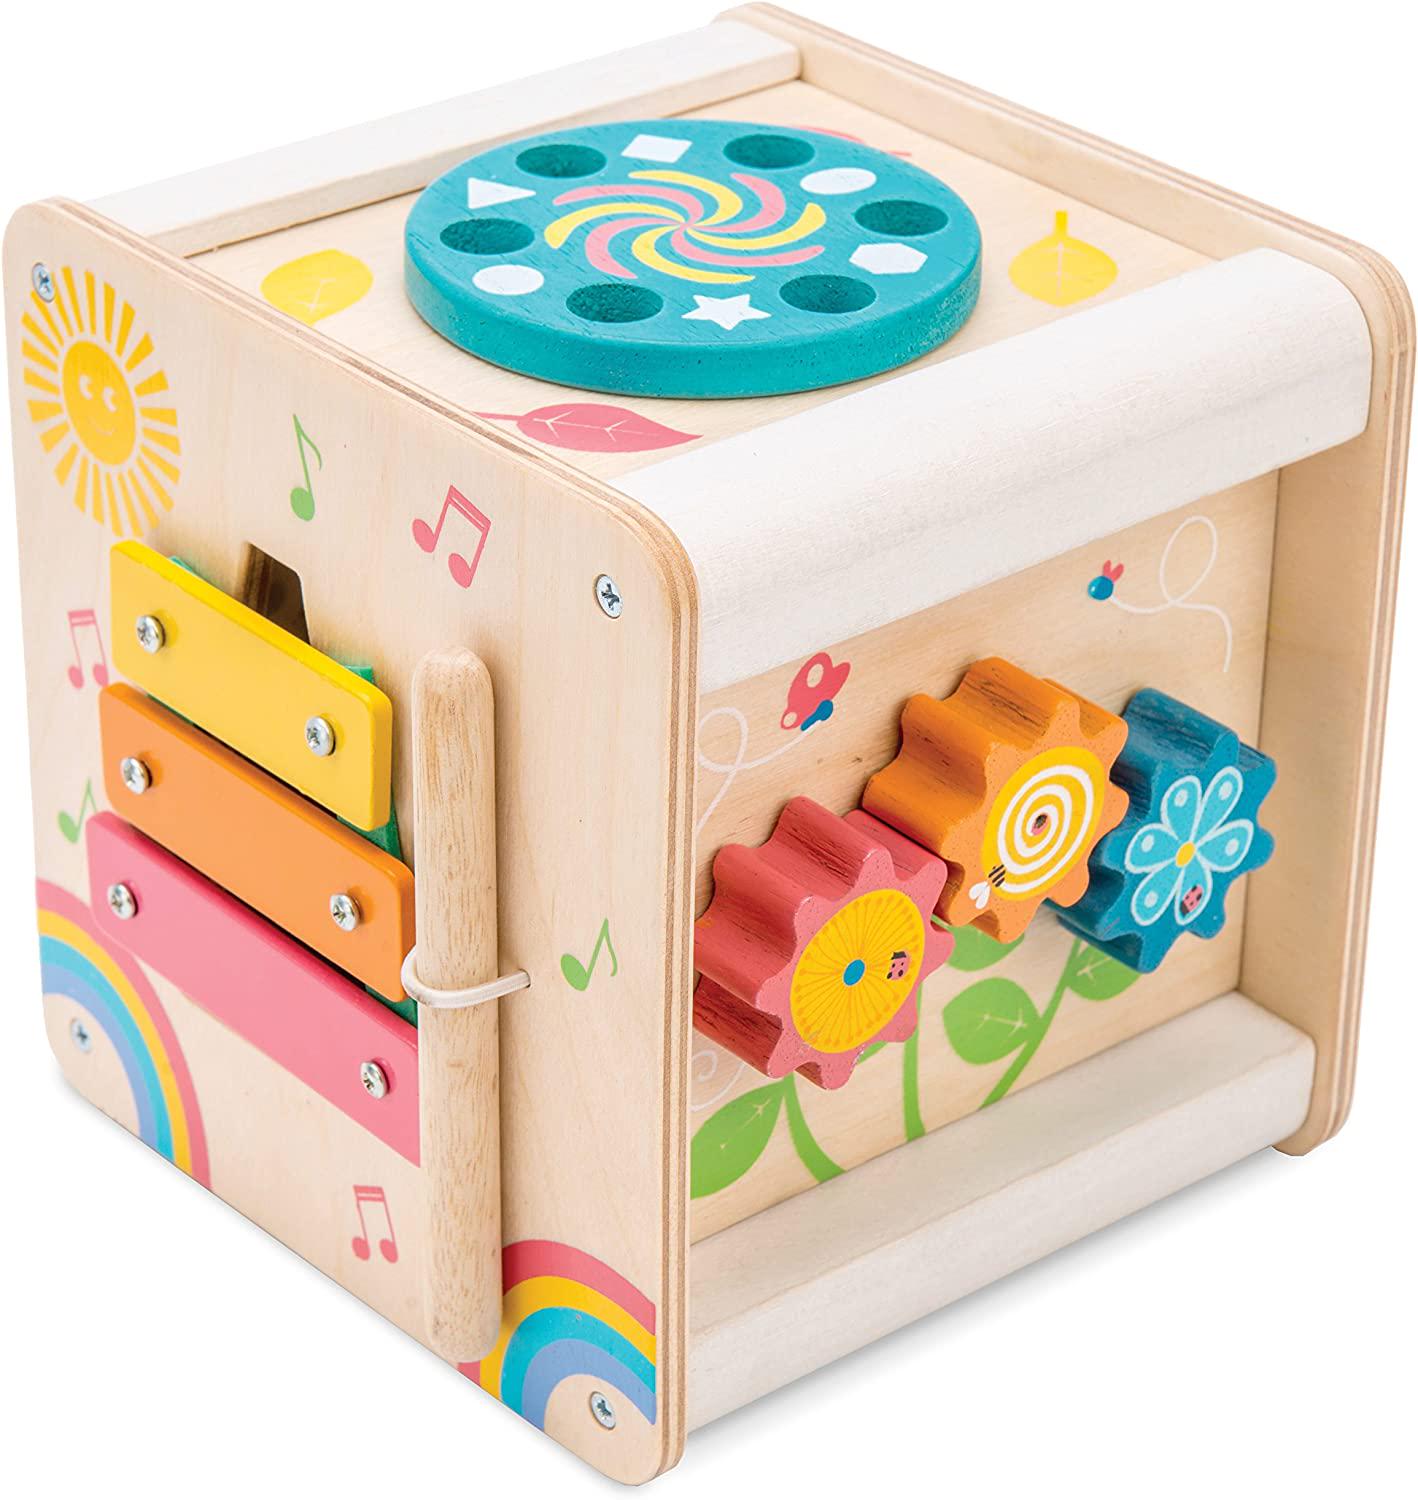 Le Toy Van, Le Toy Van Petilou Activity Cube Learning Set Premium Wooden Toys for Kids Ages 12 Months and Up, Multi